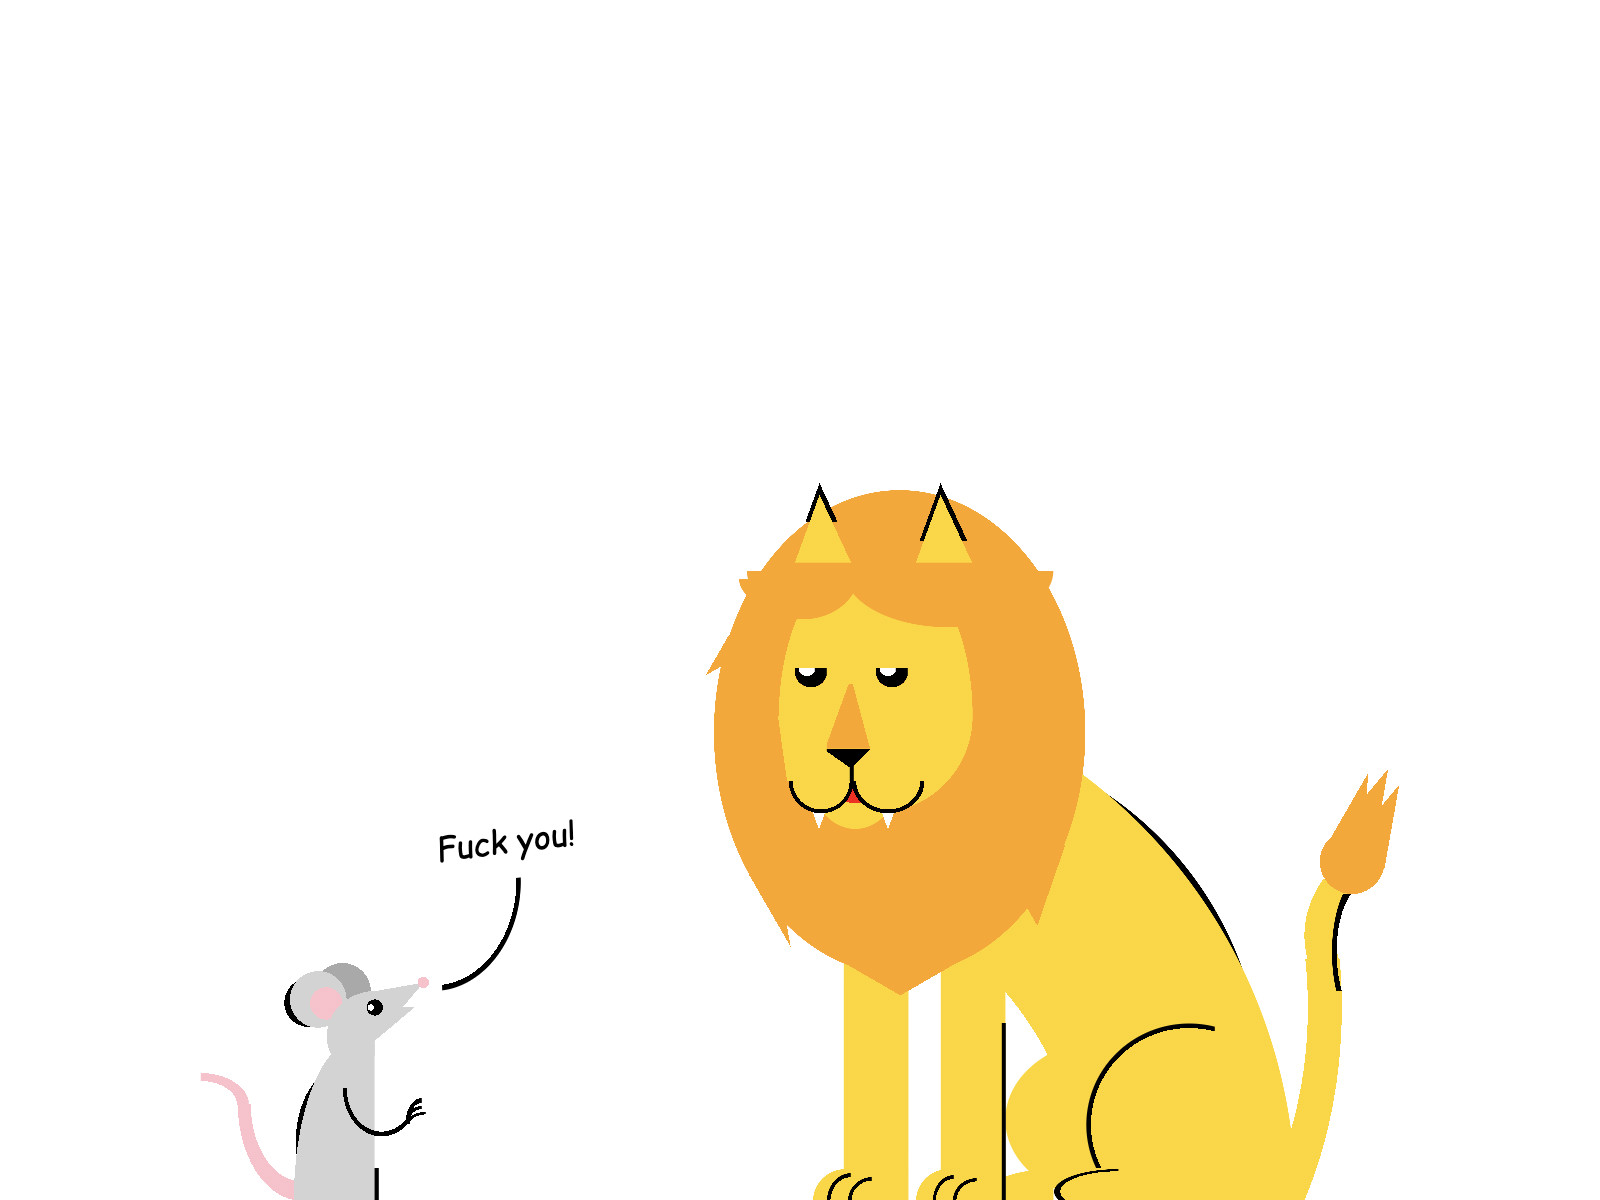 Cartoon of a mouse saying 'fuck you' to a lion